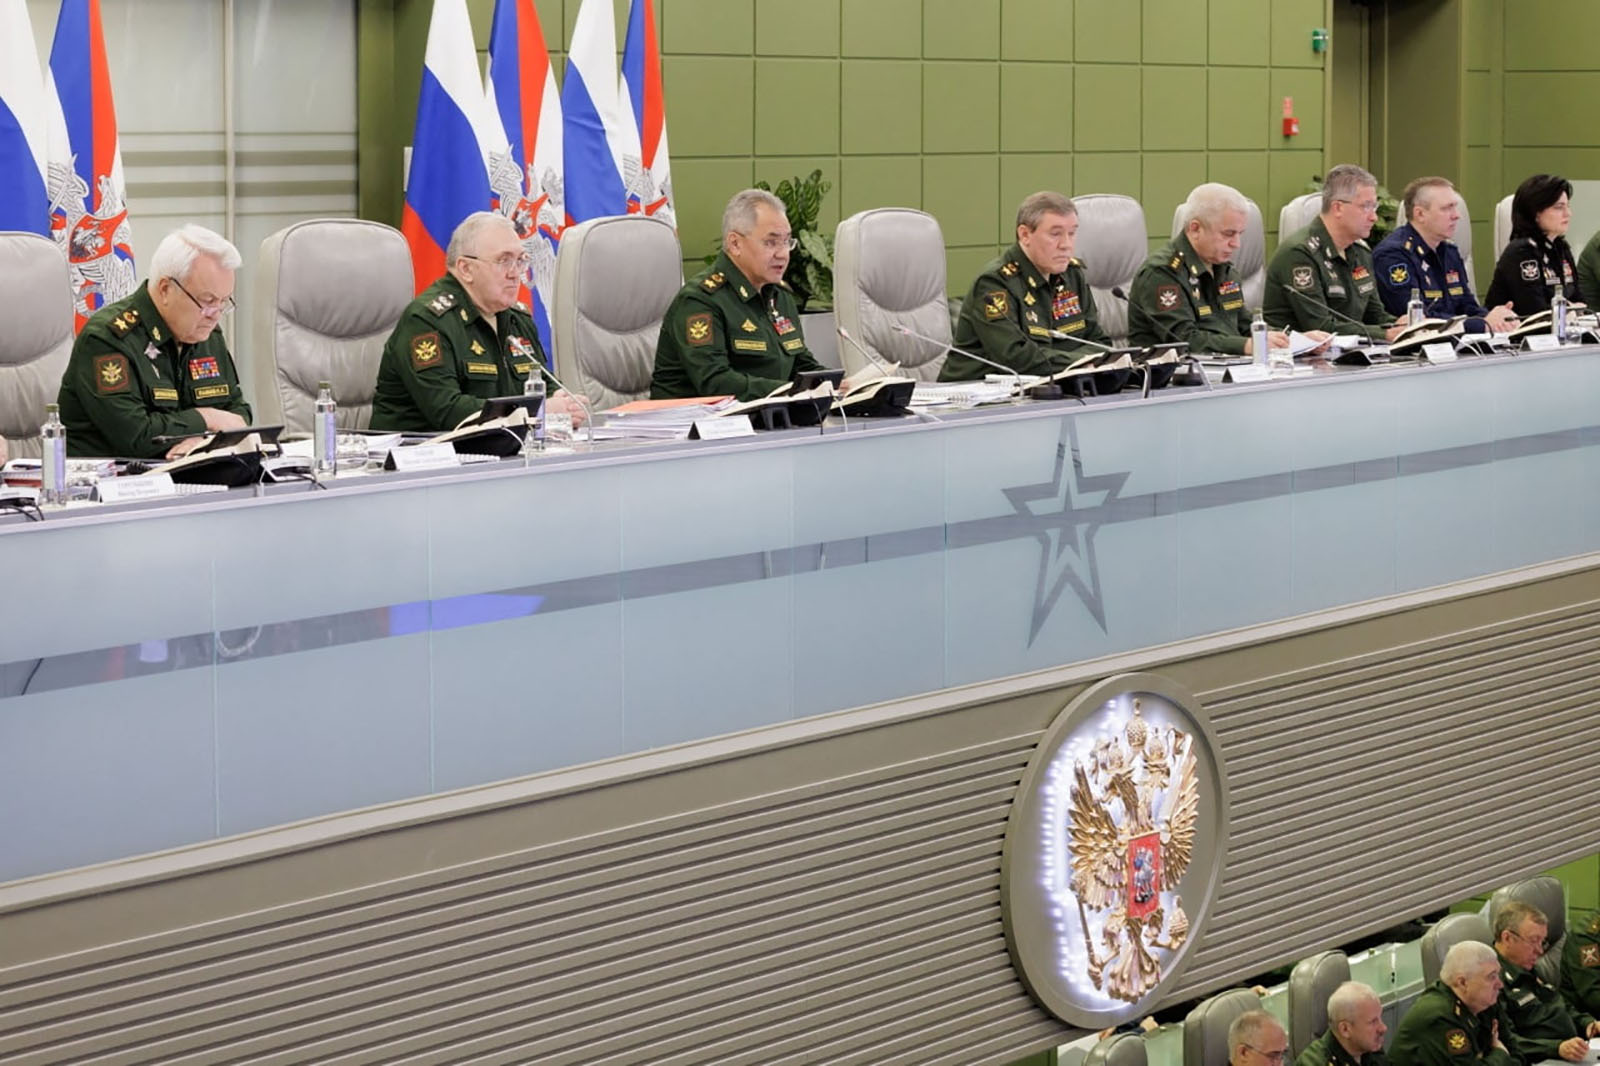 On November 1, Russian Defense Minister Sergey Shoigu held a meeting at the National Defense Management Center in Moscow.